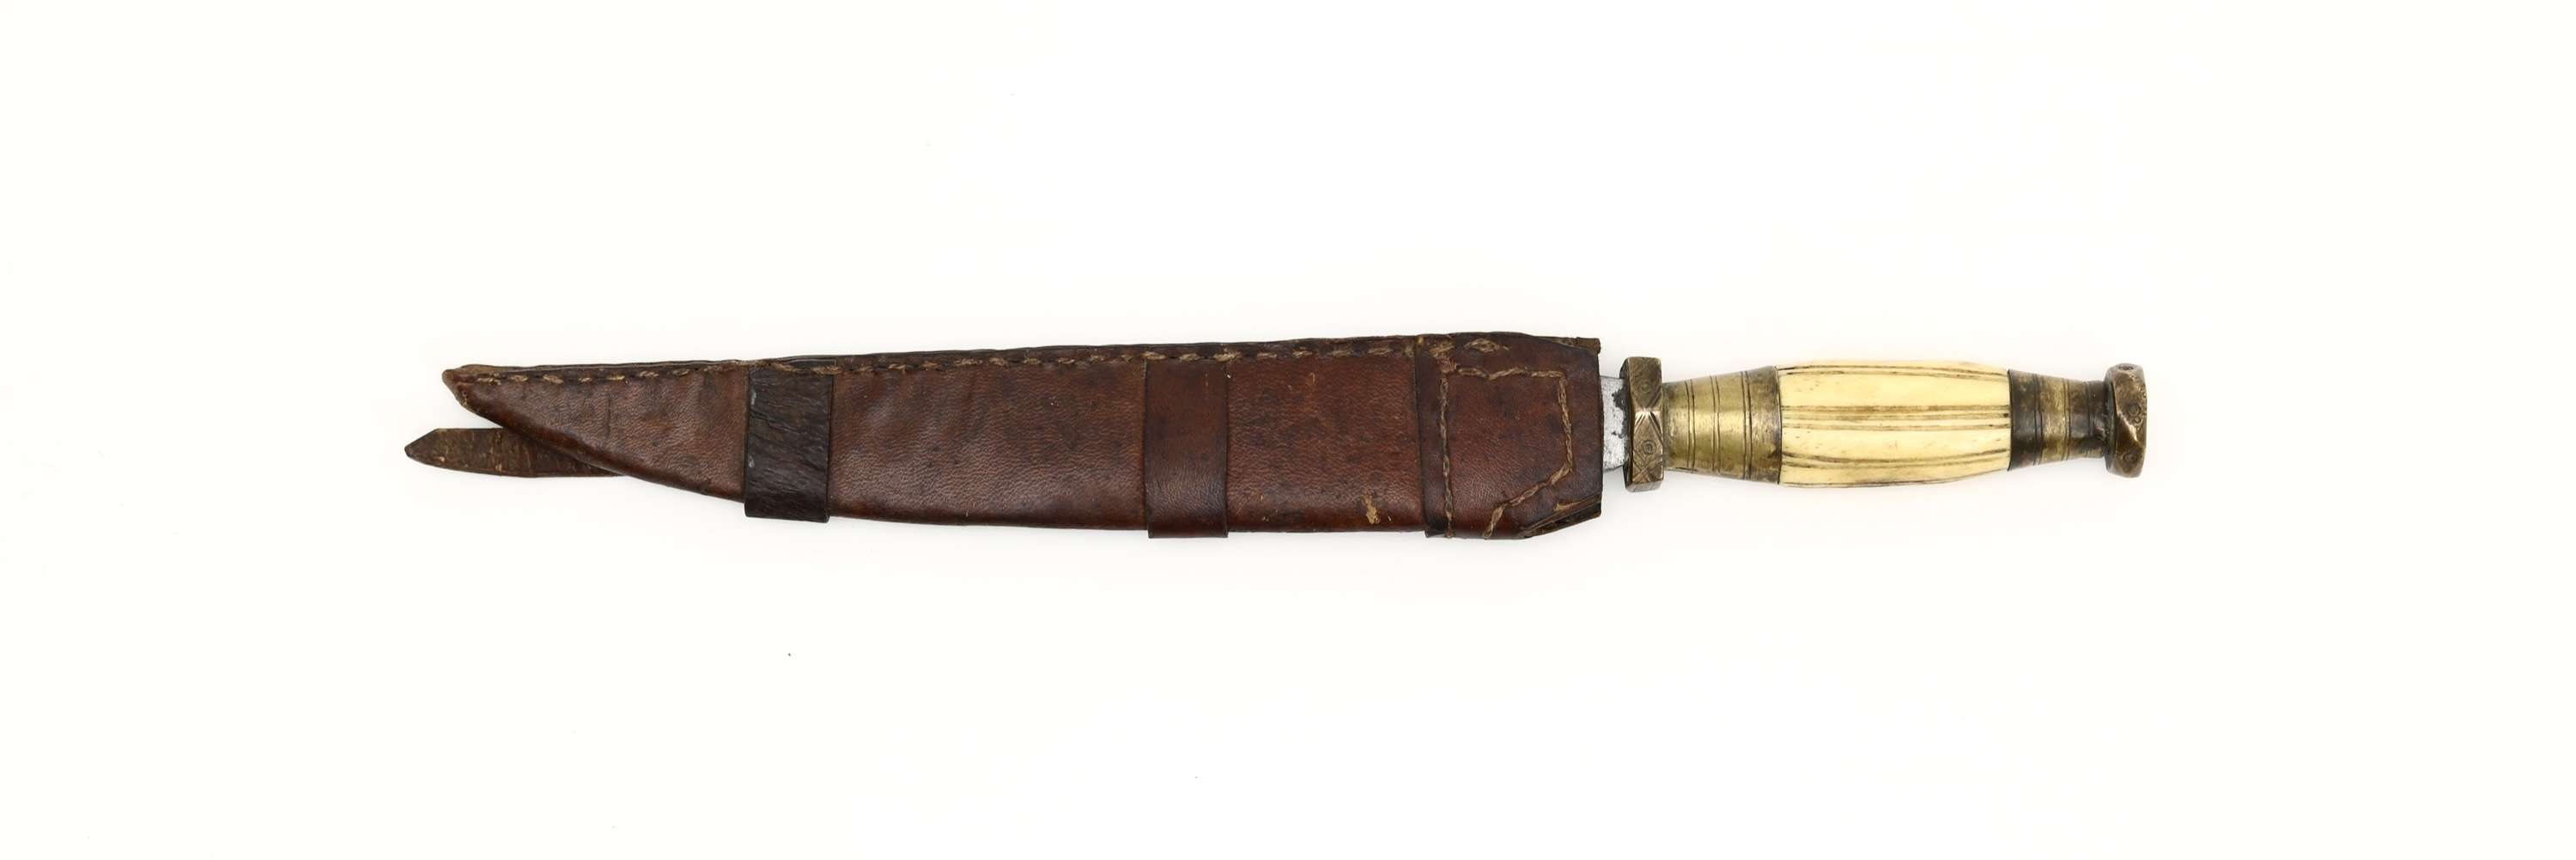 Indo-Chinese fighting dagger